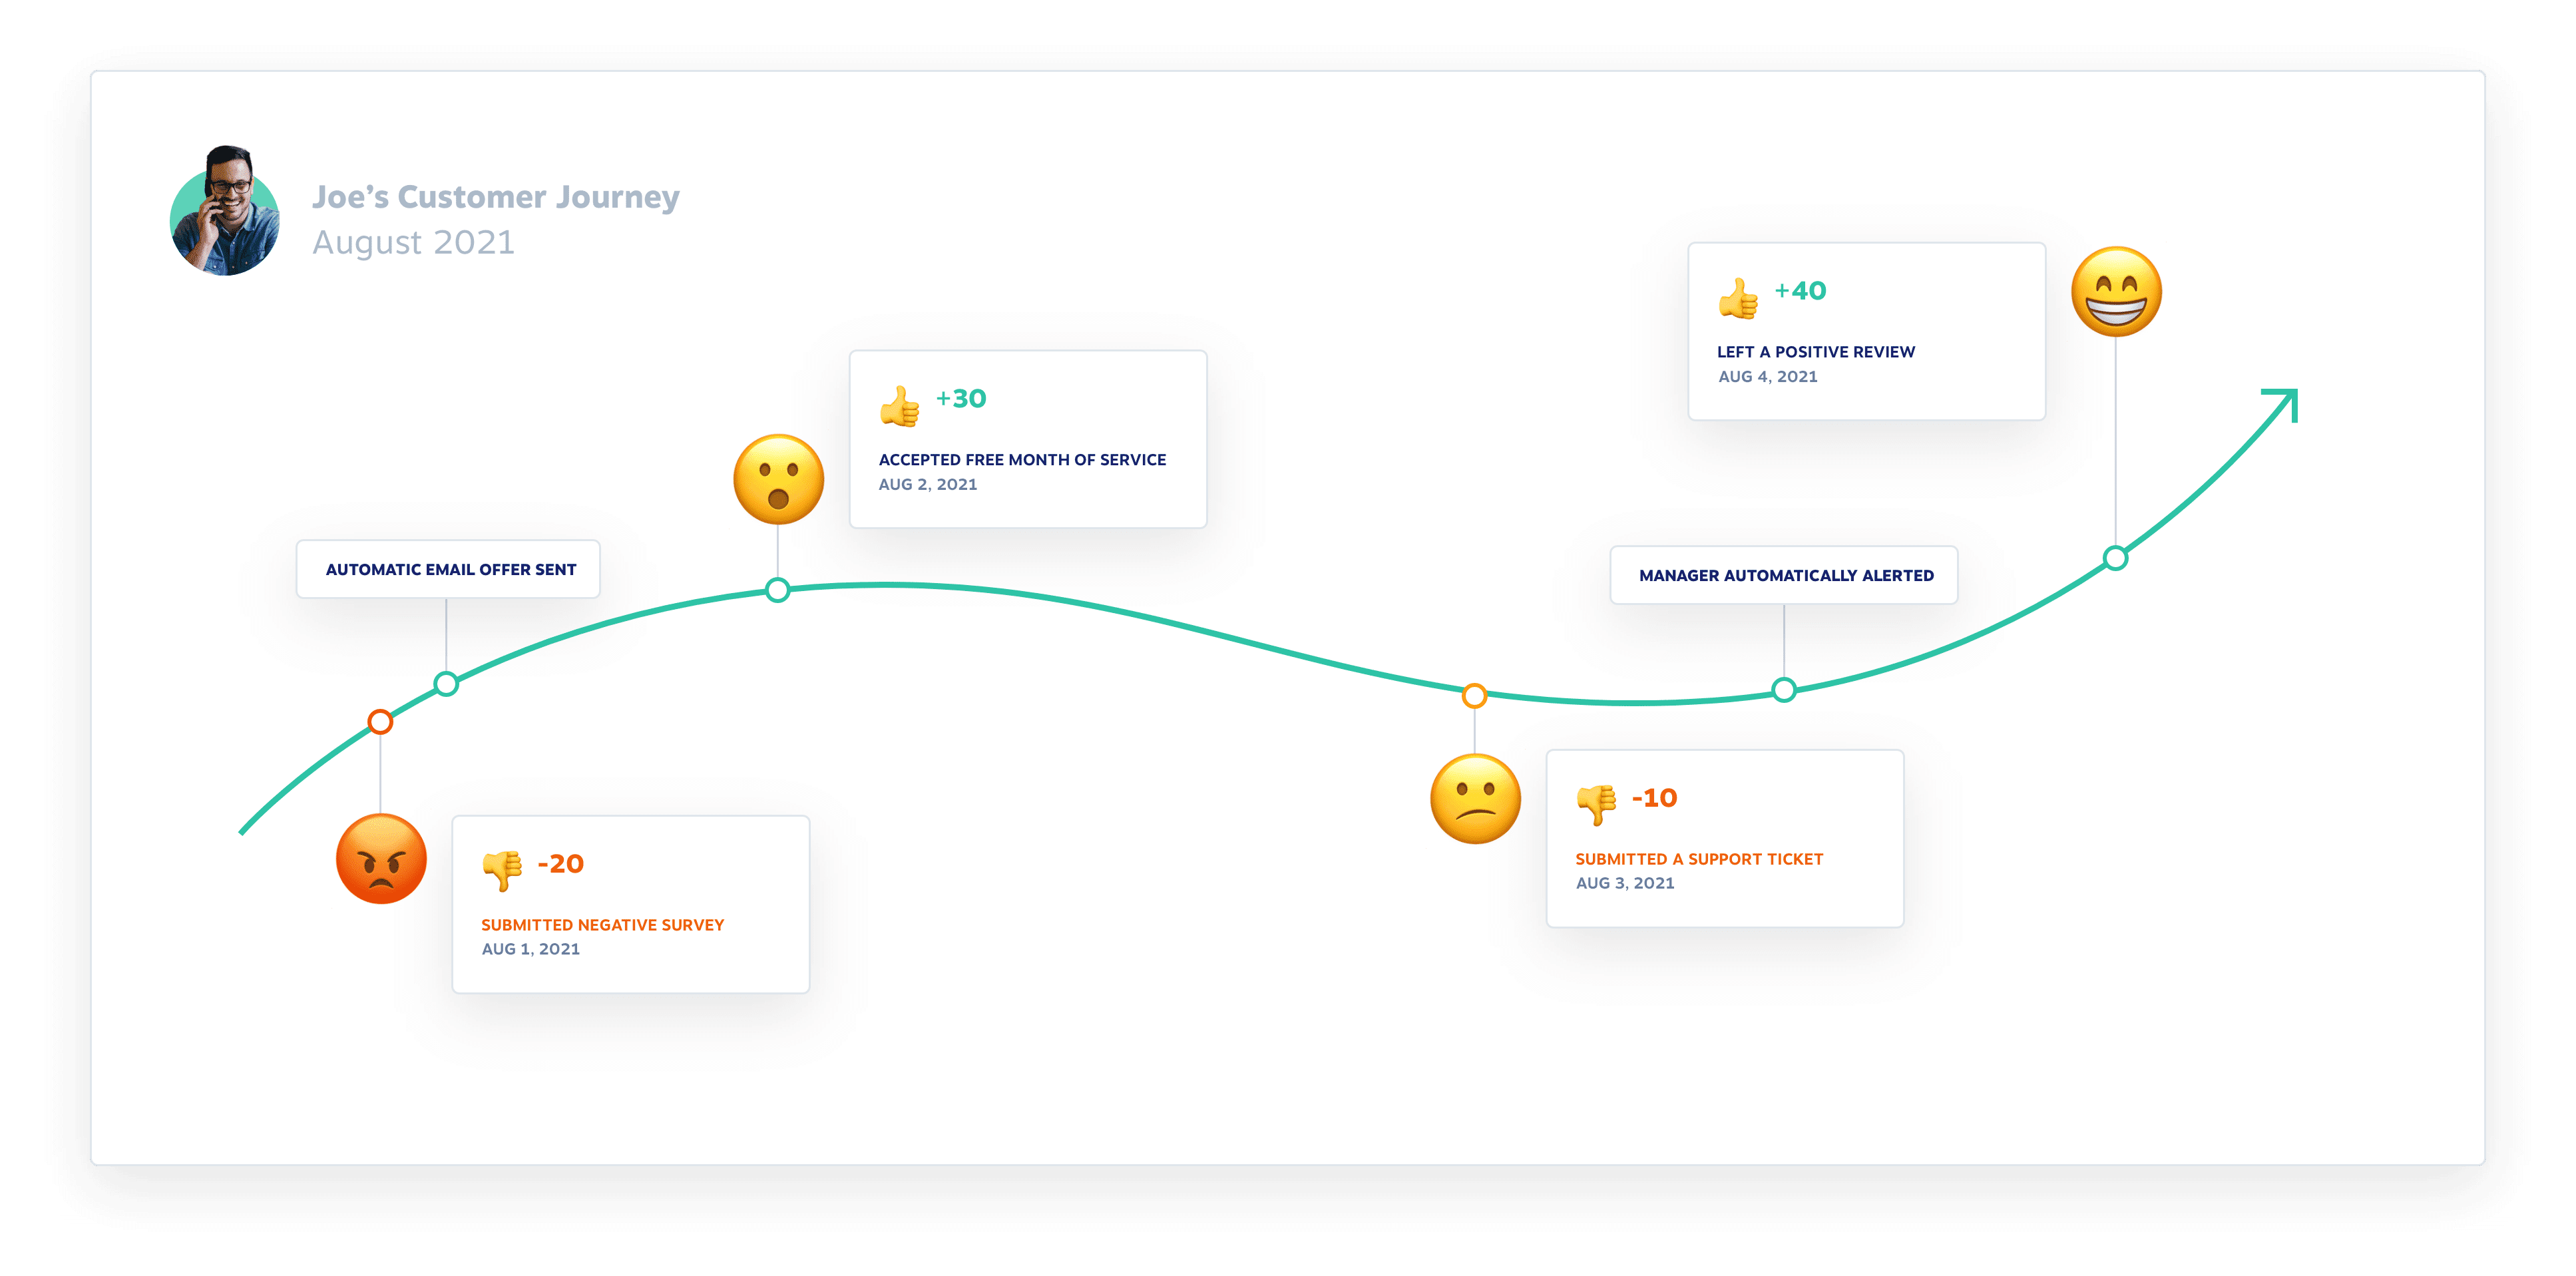 A graphic showing how a customer journey is visualized